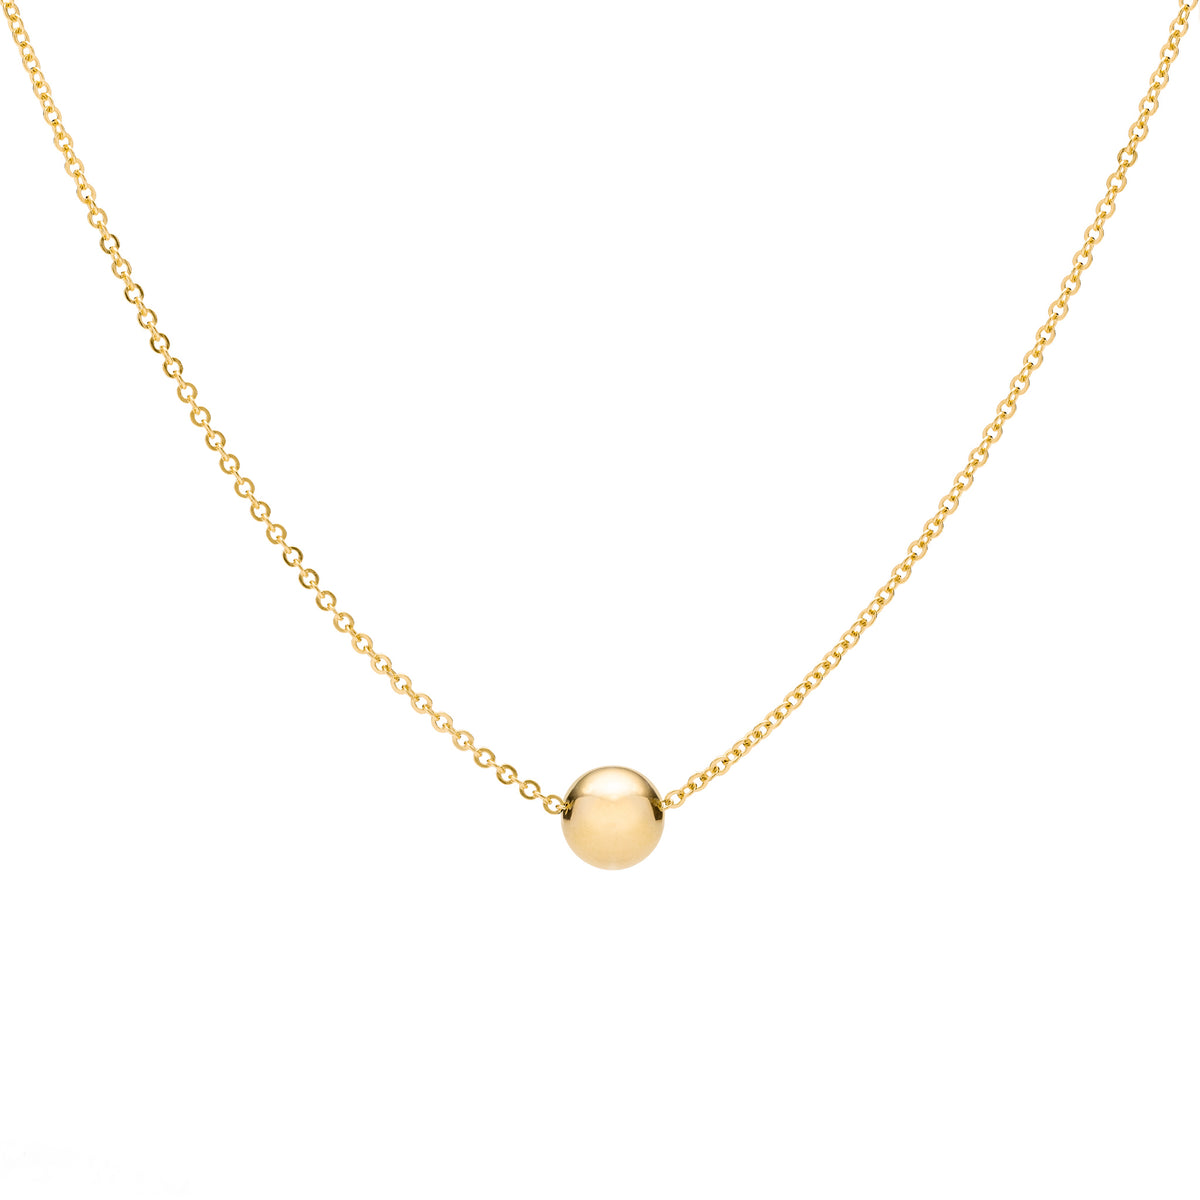 Blush and White Pearl Connector Necklace 14K Yellow Gold / 15 Inches by Baby Gold - Shop Custom Gold Jewelry